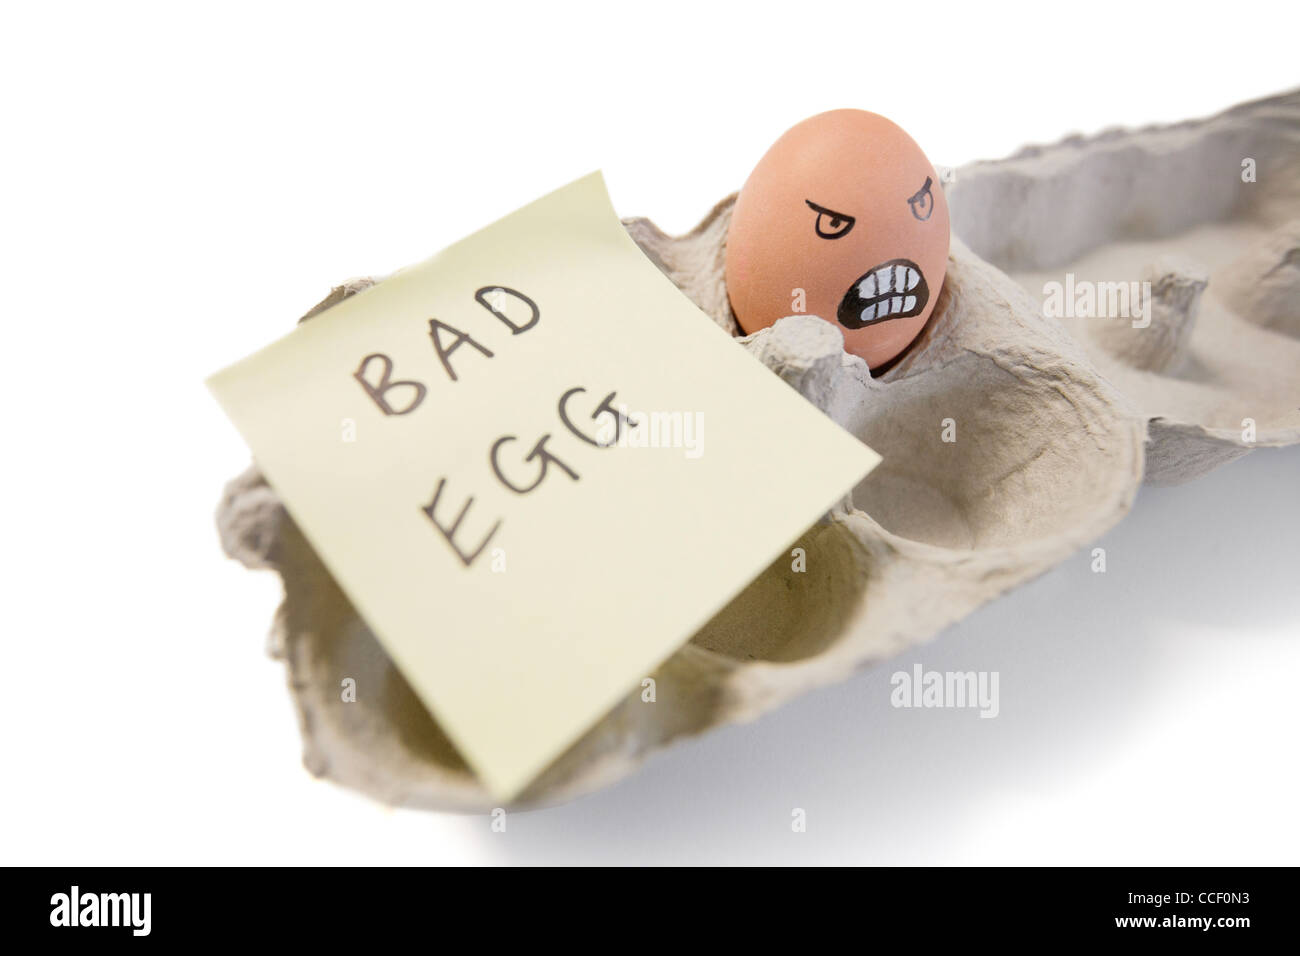 One bad egg with a face drawn on it Stock Photo